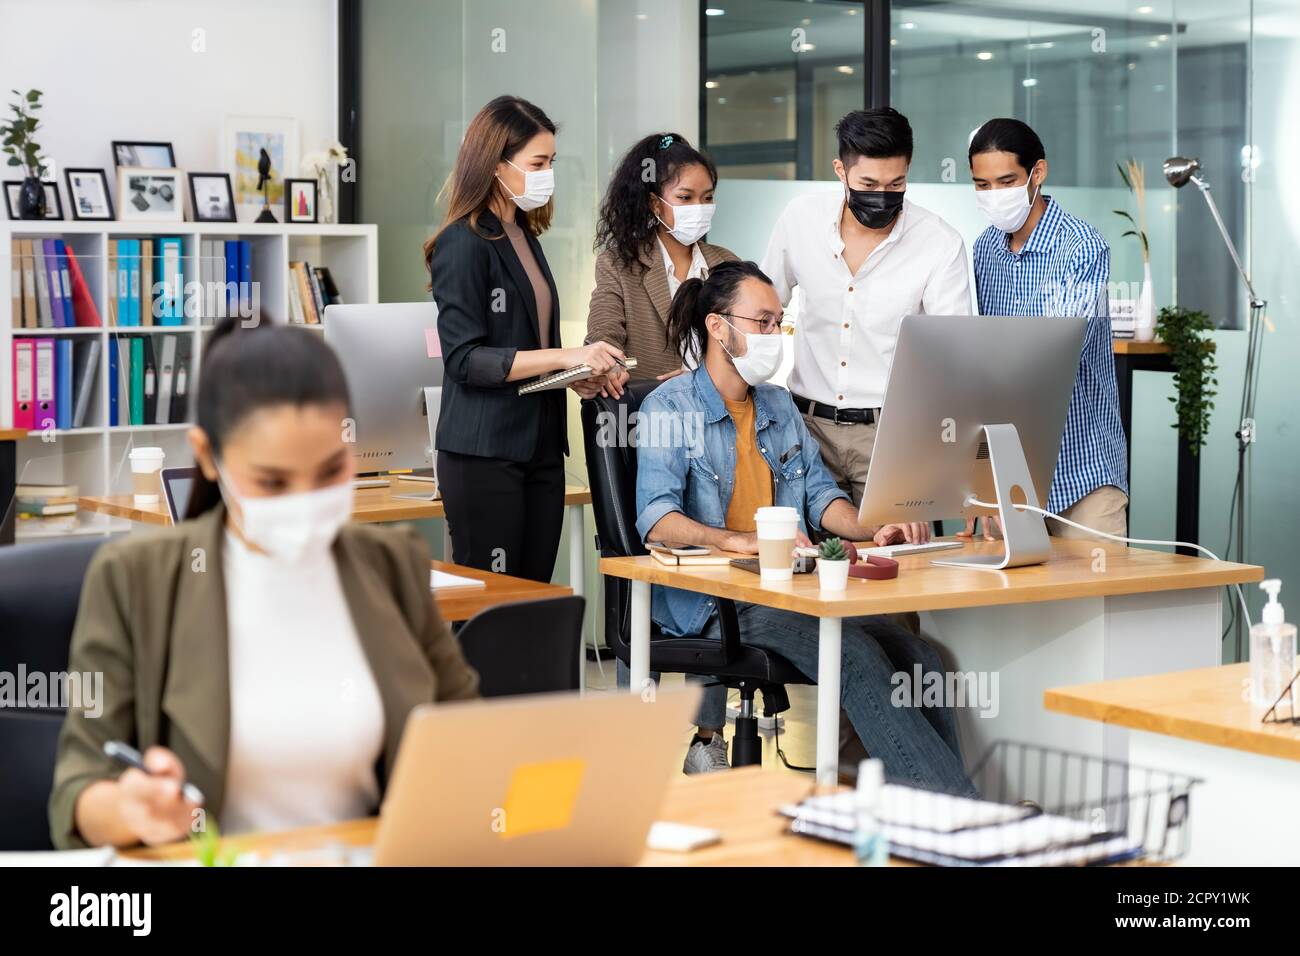 Group portrait of interracial business worker team wear protective face mask in new normal office with social distance practice prevent coronavirus CO Stock Photo